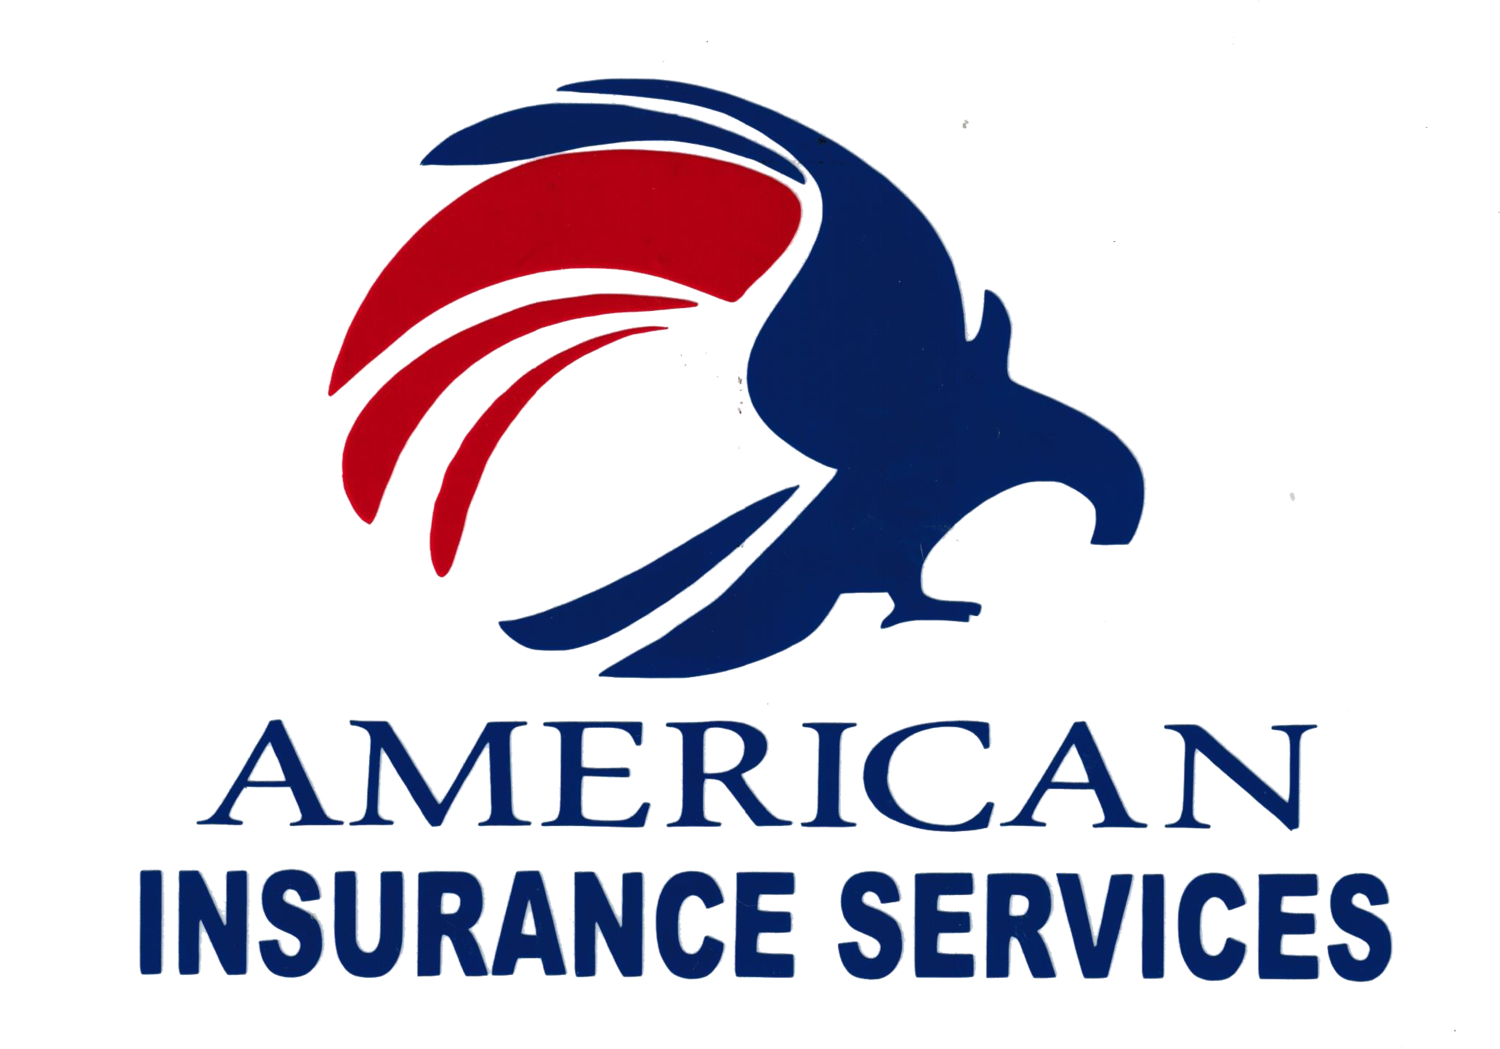 Life Insurance — American Insurance Services